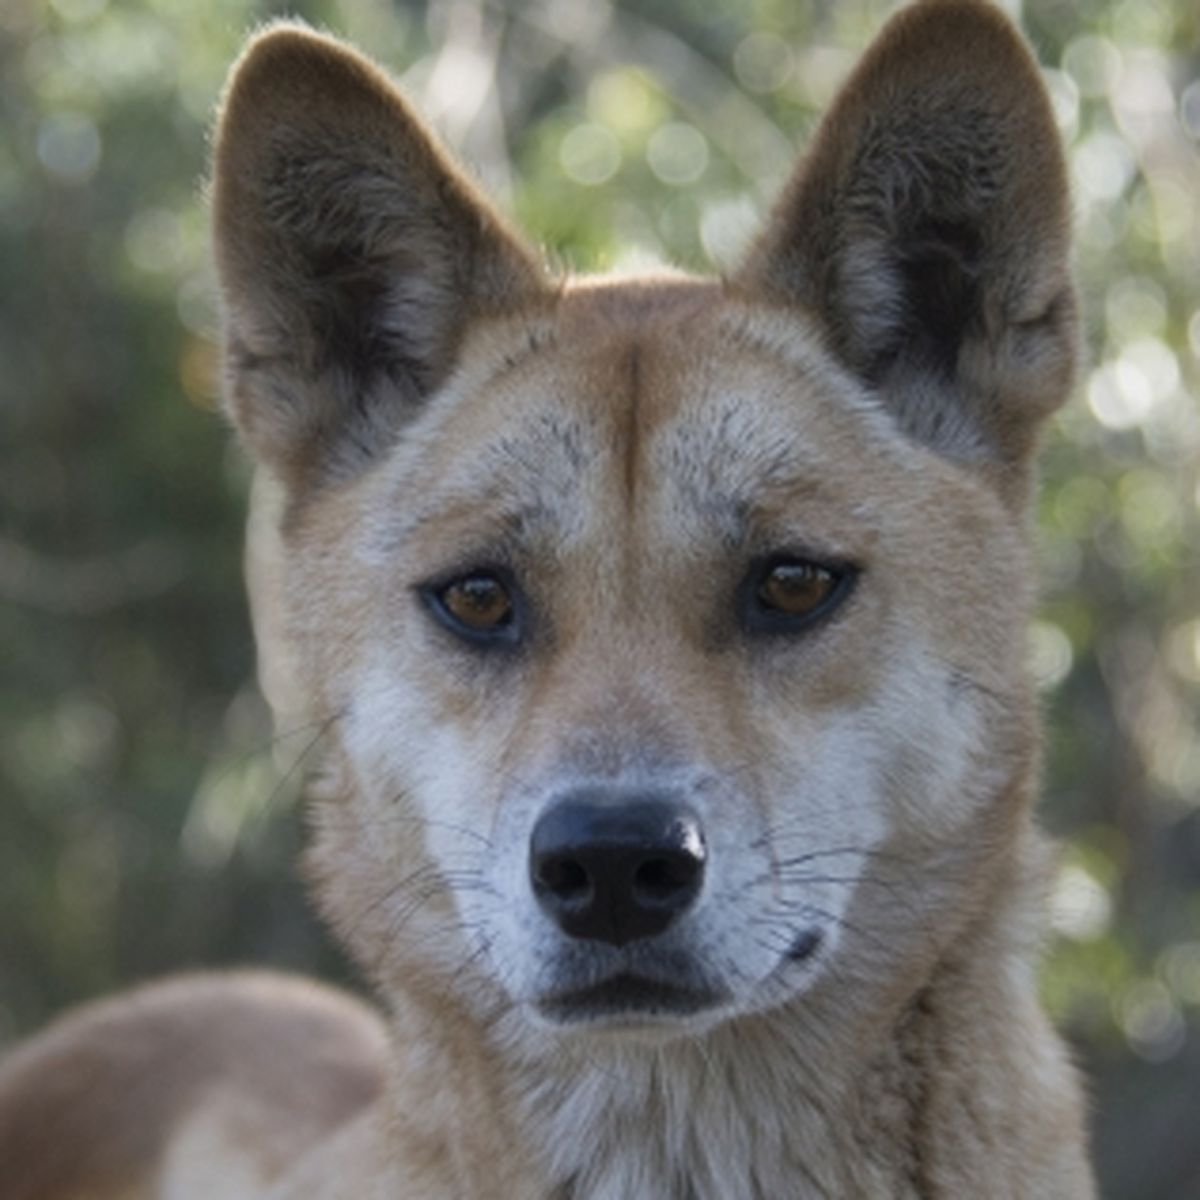 Dingo genetic code: Scientists reveal what the Australian animal really is